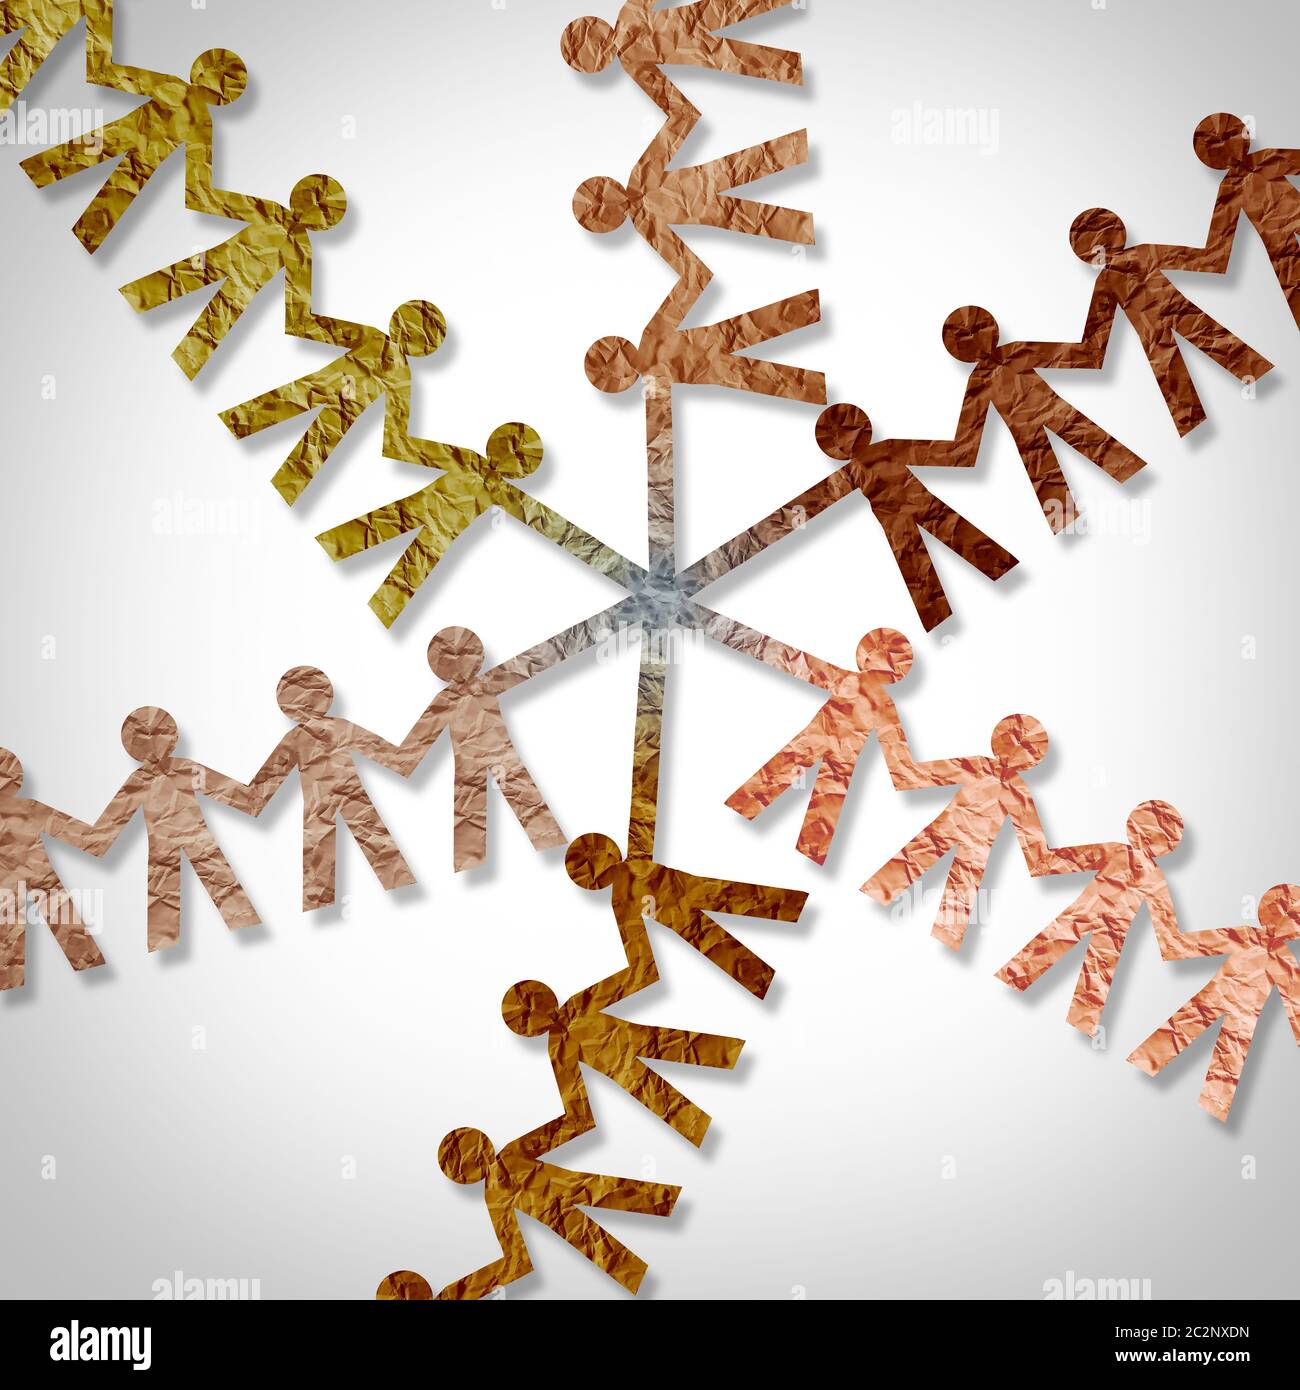 Social unity and cultural diversity concept as diverse people in a 3D illustration style. Stock Photo